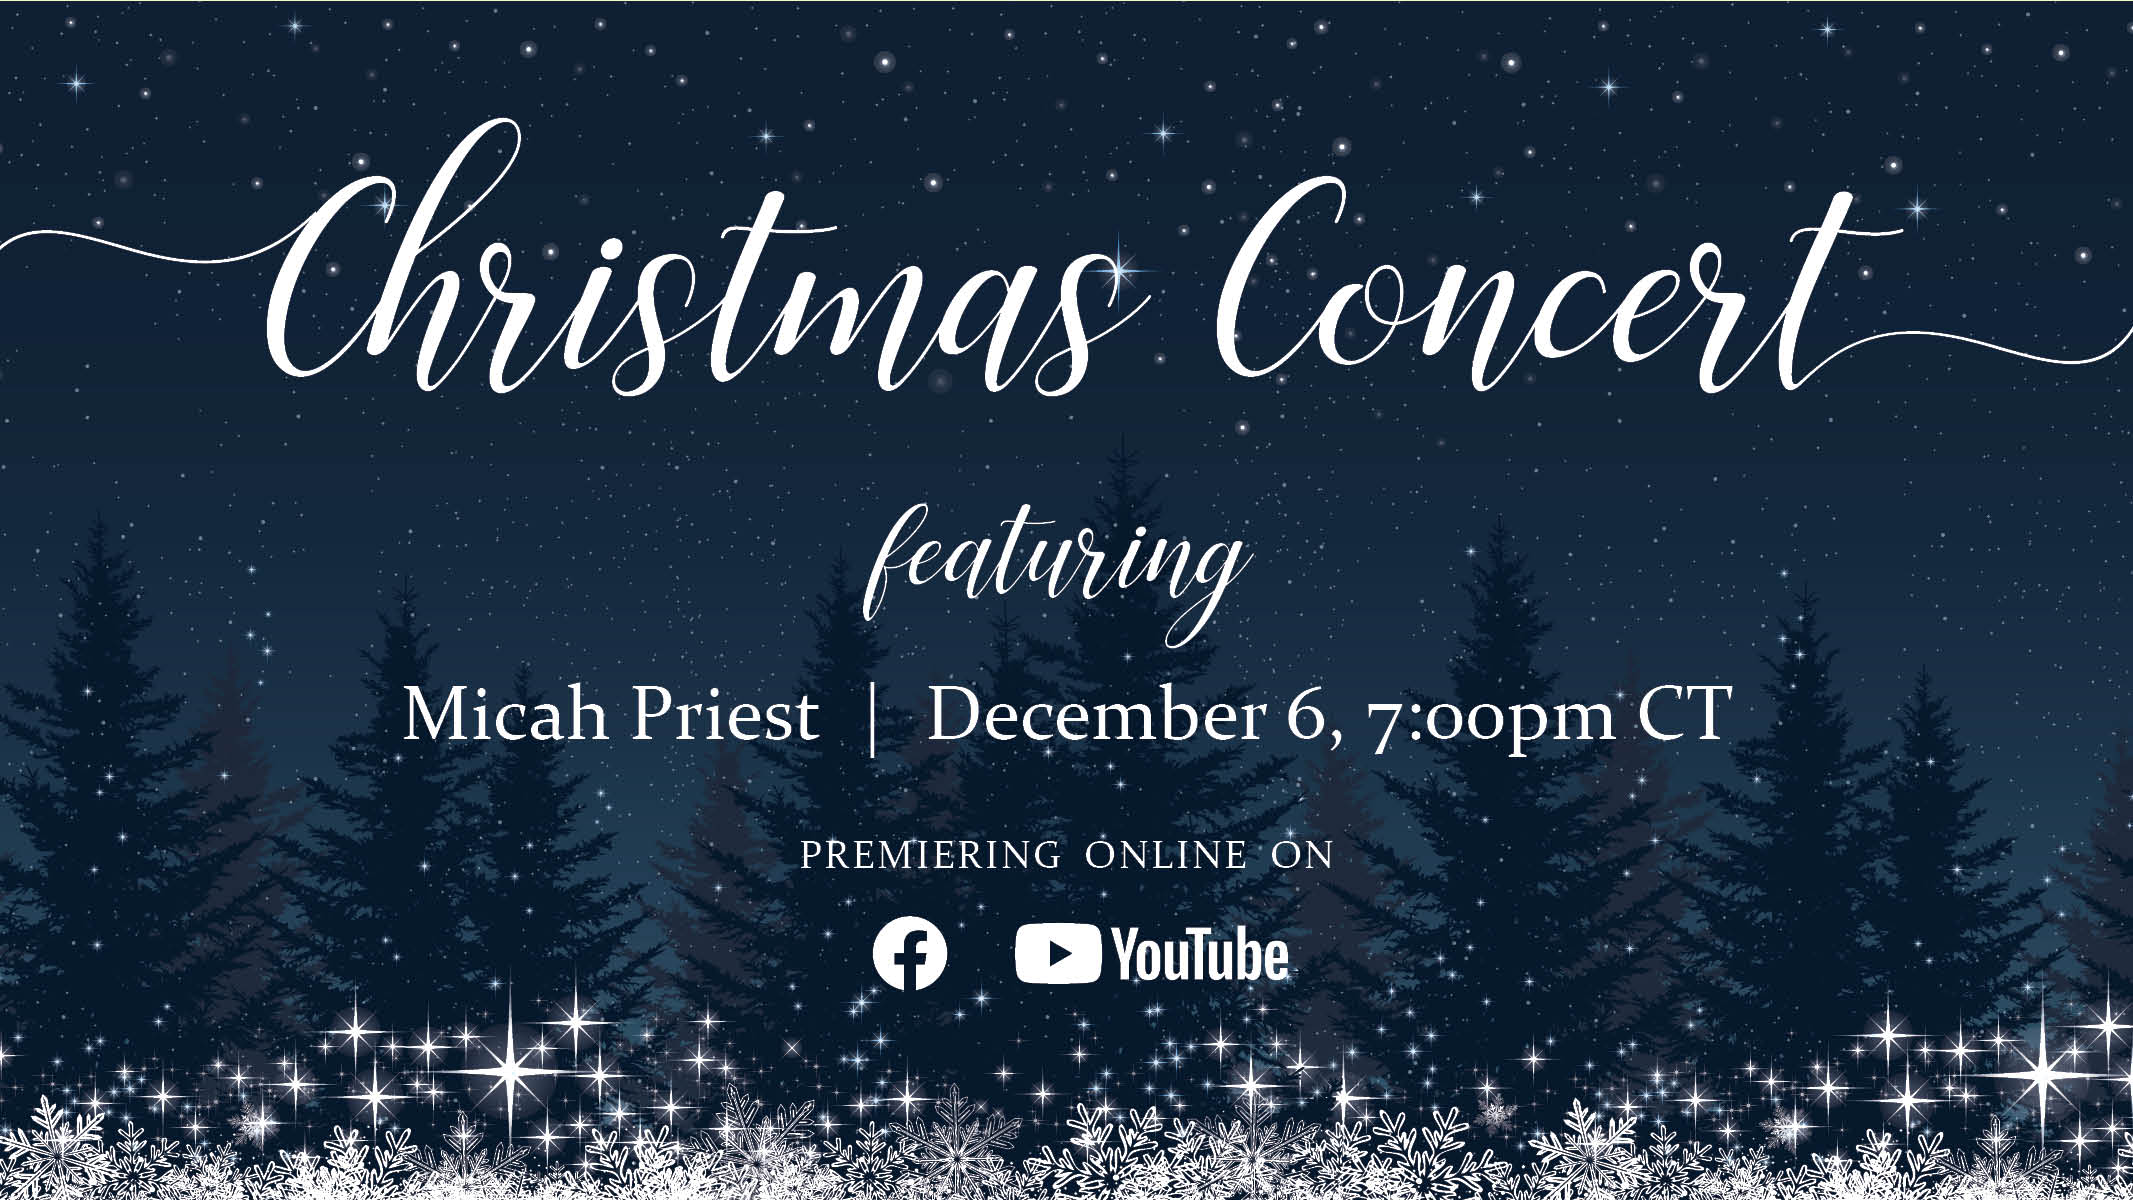 Christmas Concert with Micah Priest